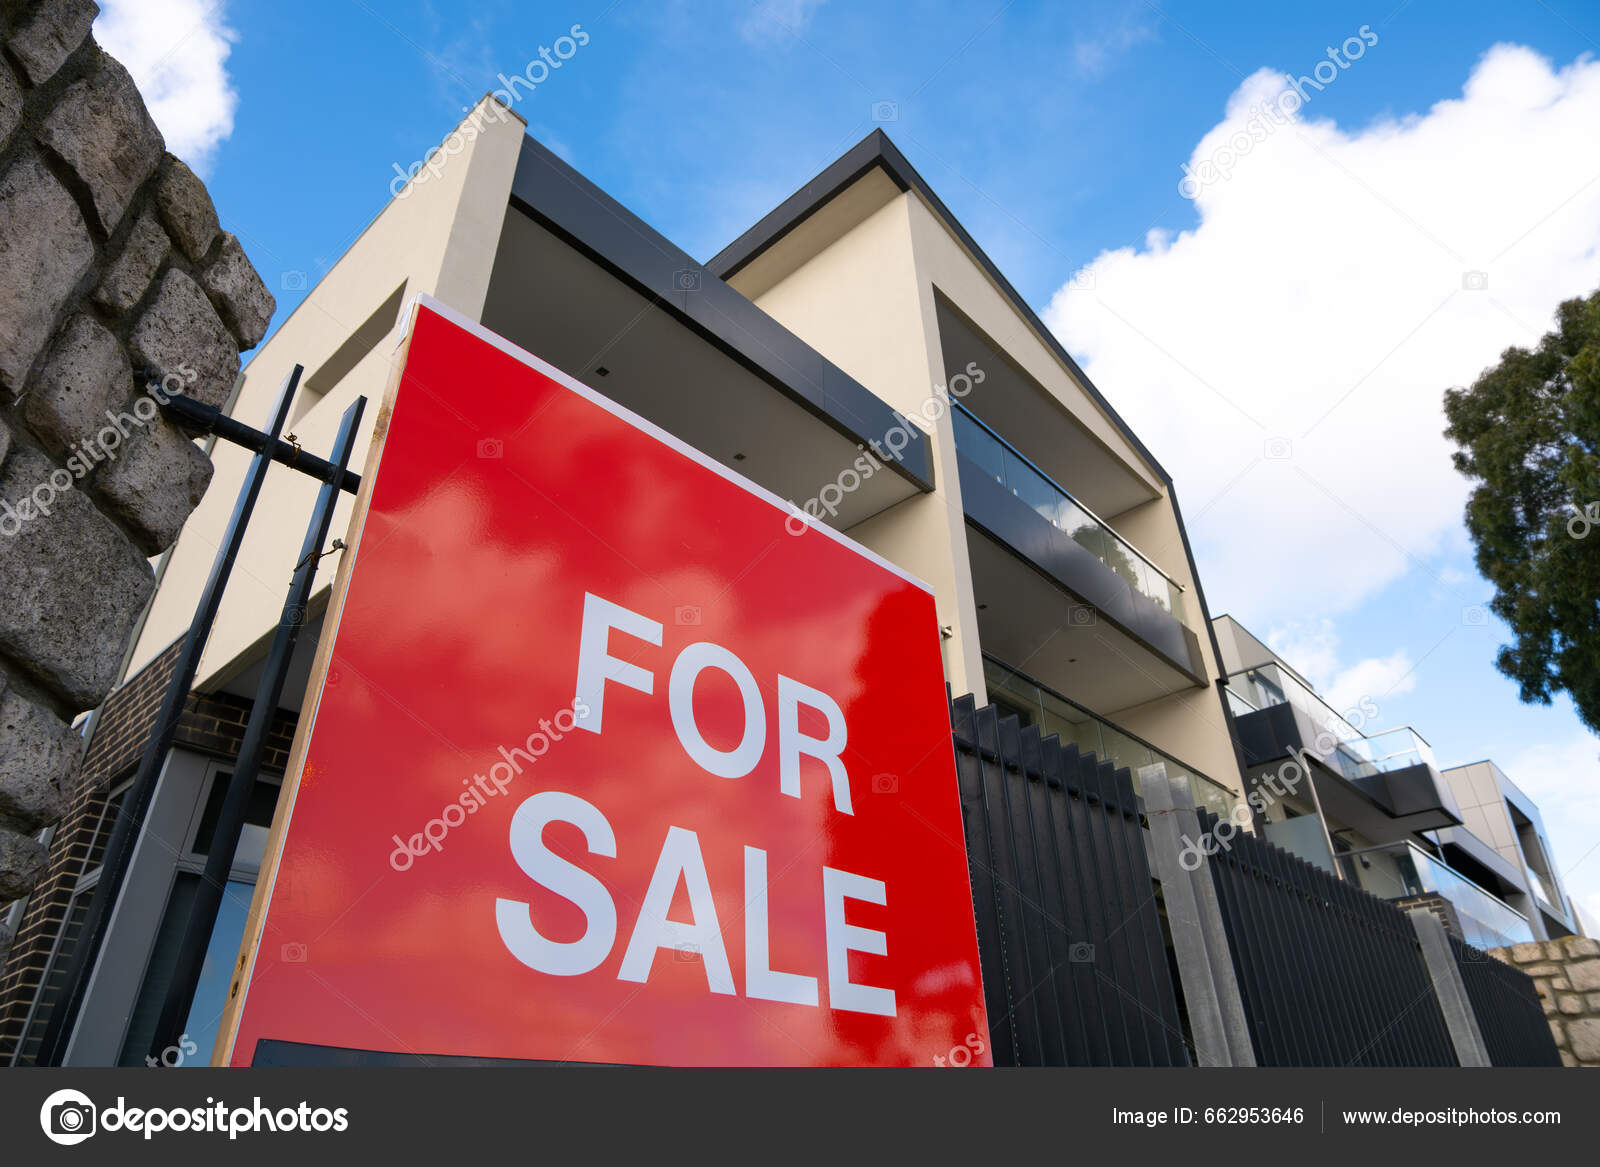 House for Sale stock photo. Image of investment, architecture